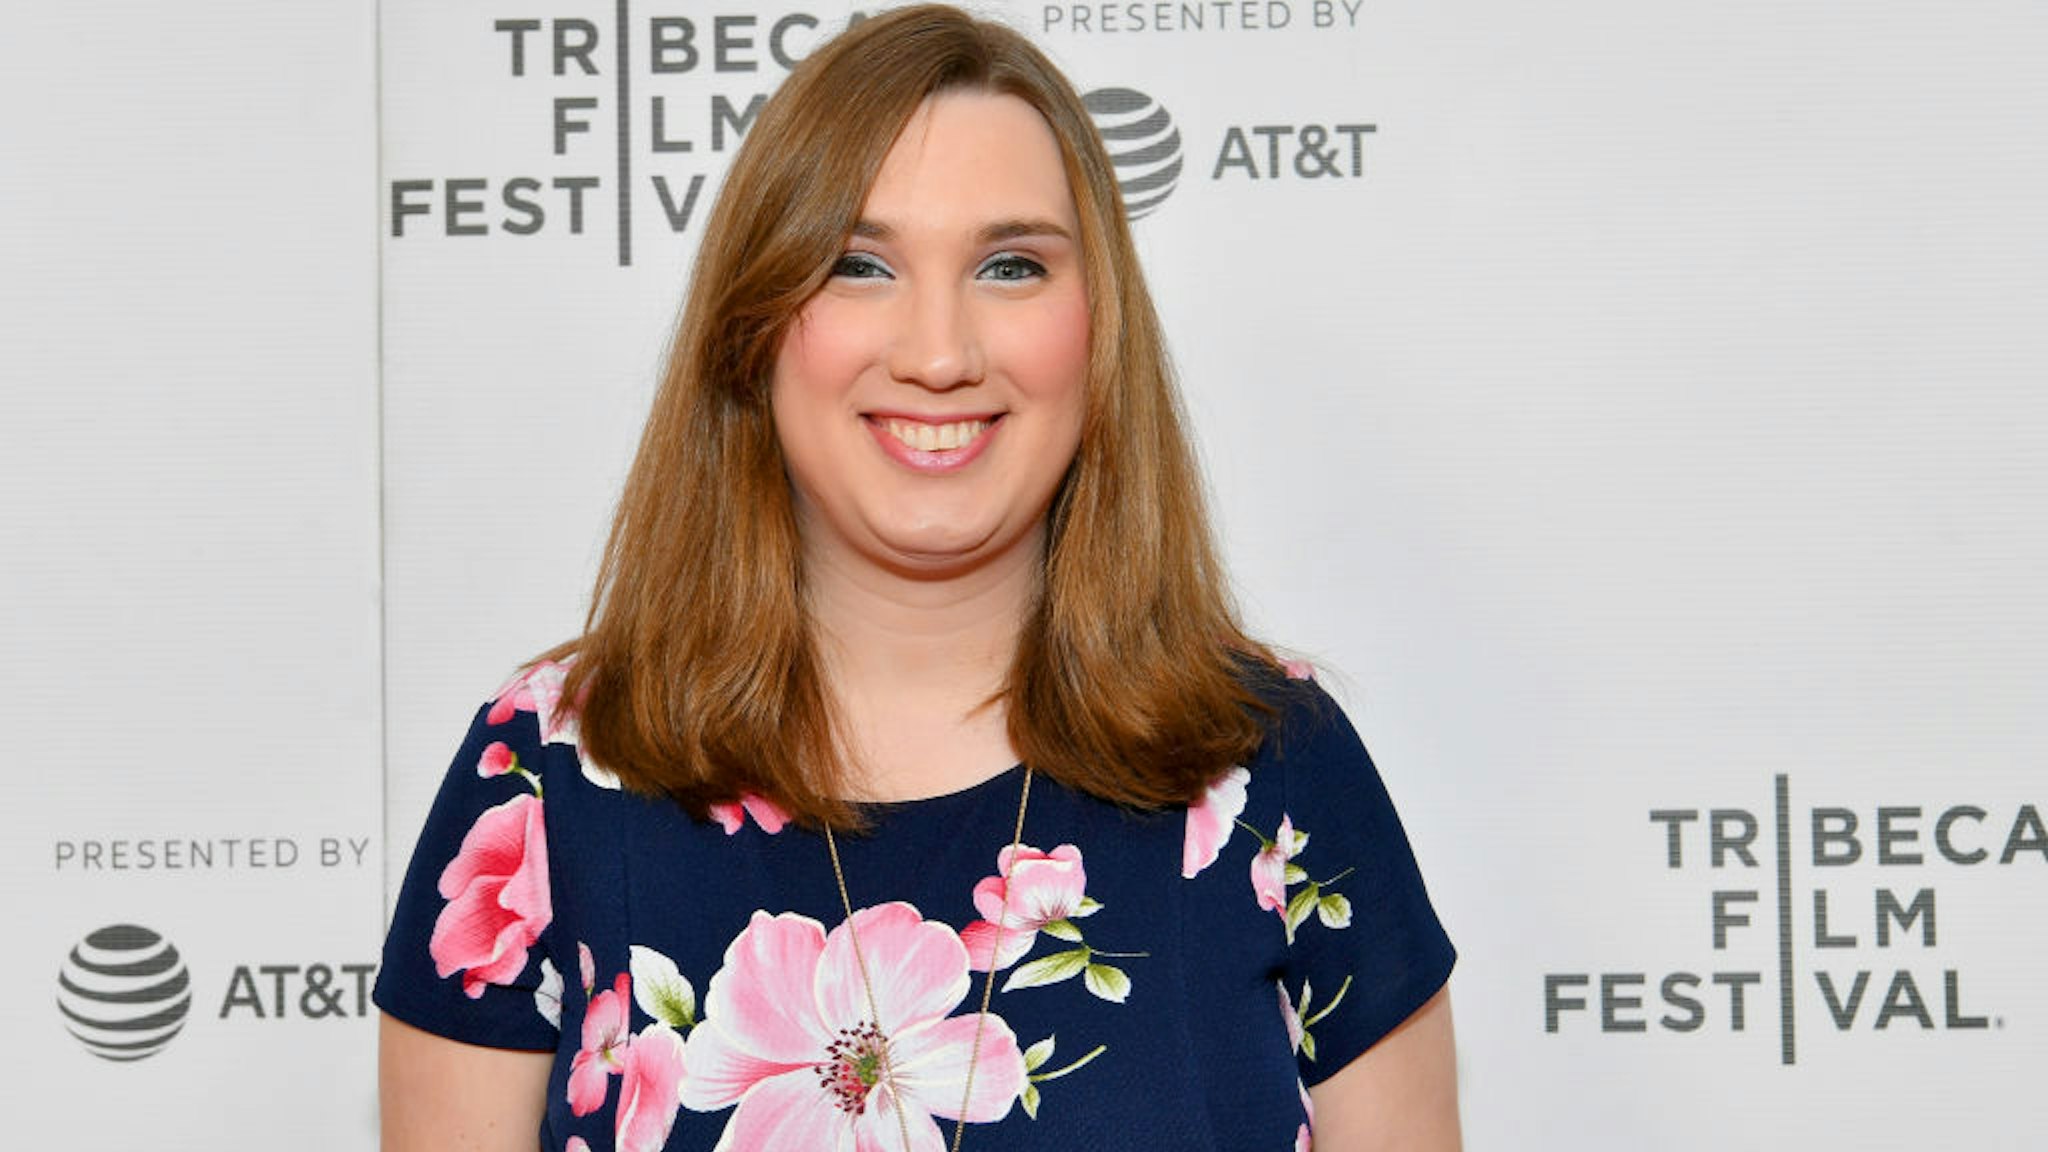 Sarah McBride attends the "For They Know Not What They Do" - 2019 Tribeca Film Festival at Village East Cinema on April 25, 2019 in New York City